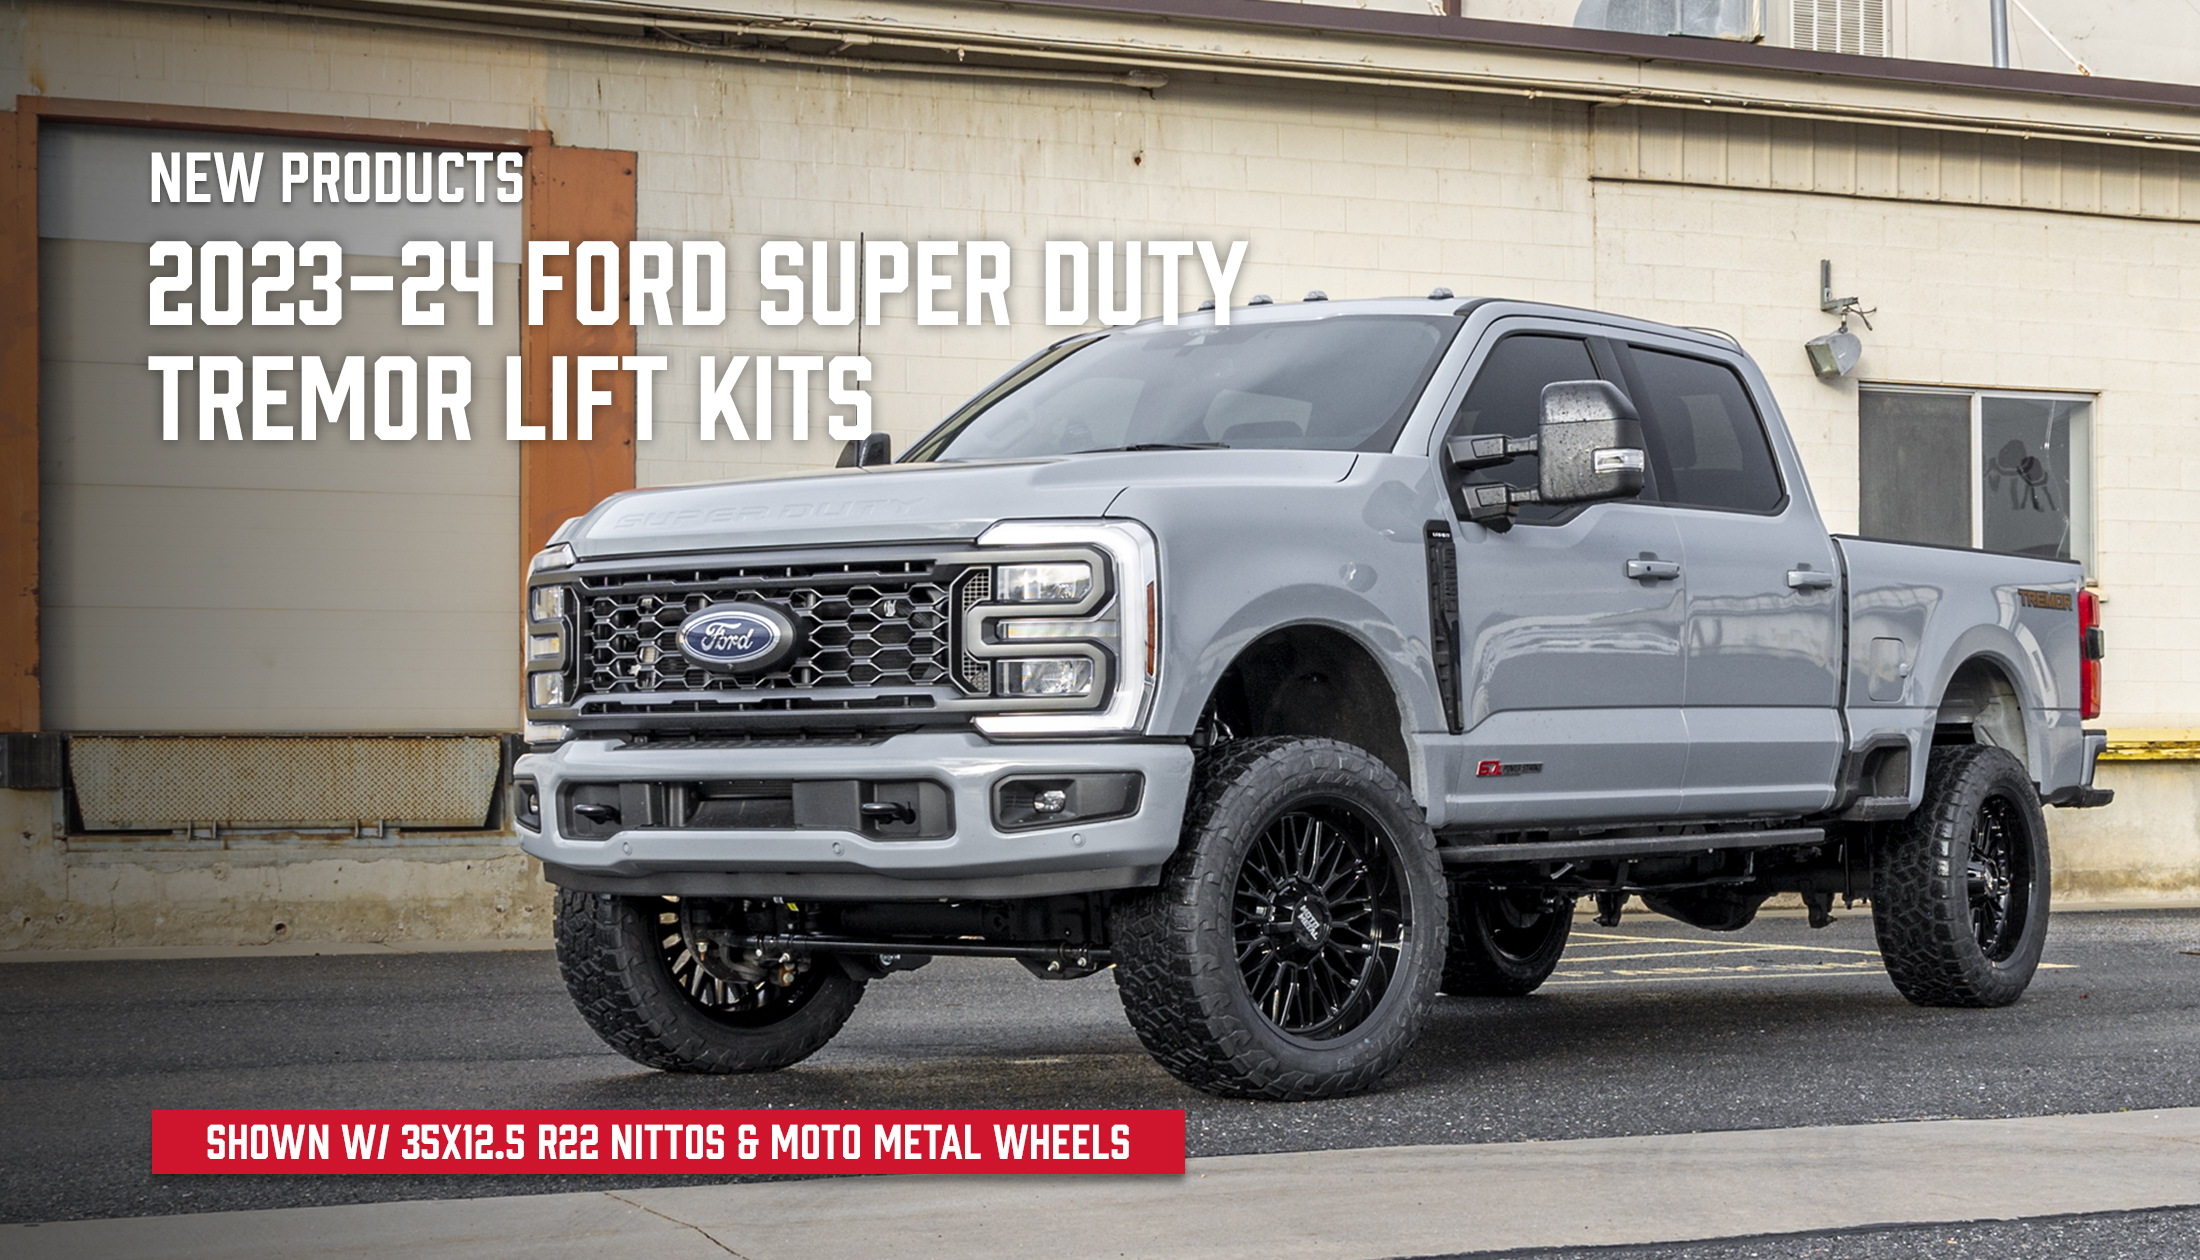 ReadyLIFT Introduces 2023-2024 Ford Super-Duty Tremor Lift Kits